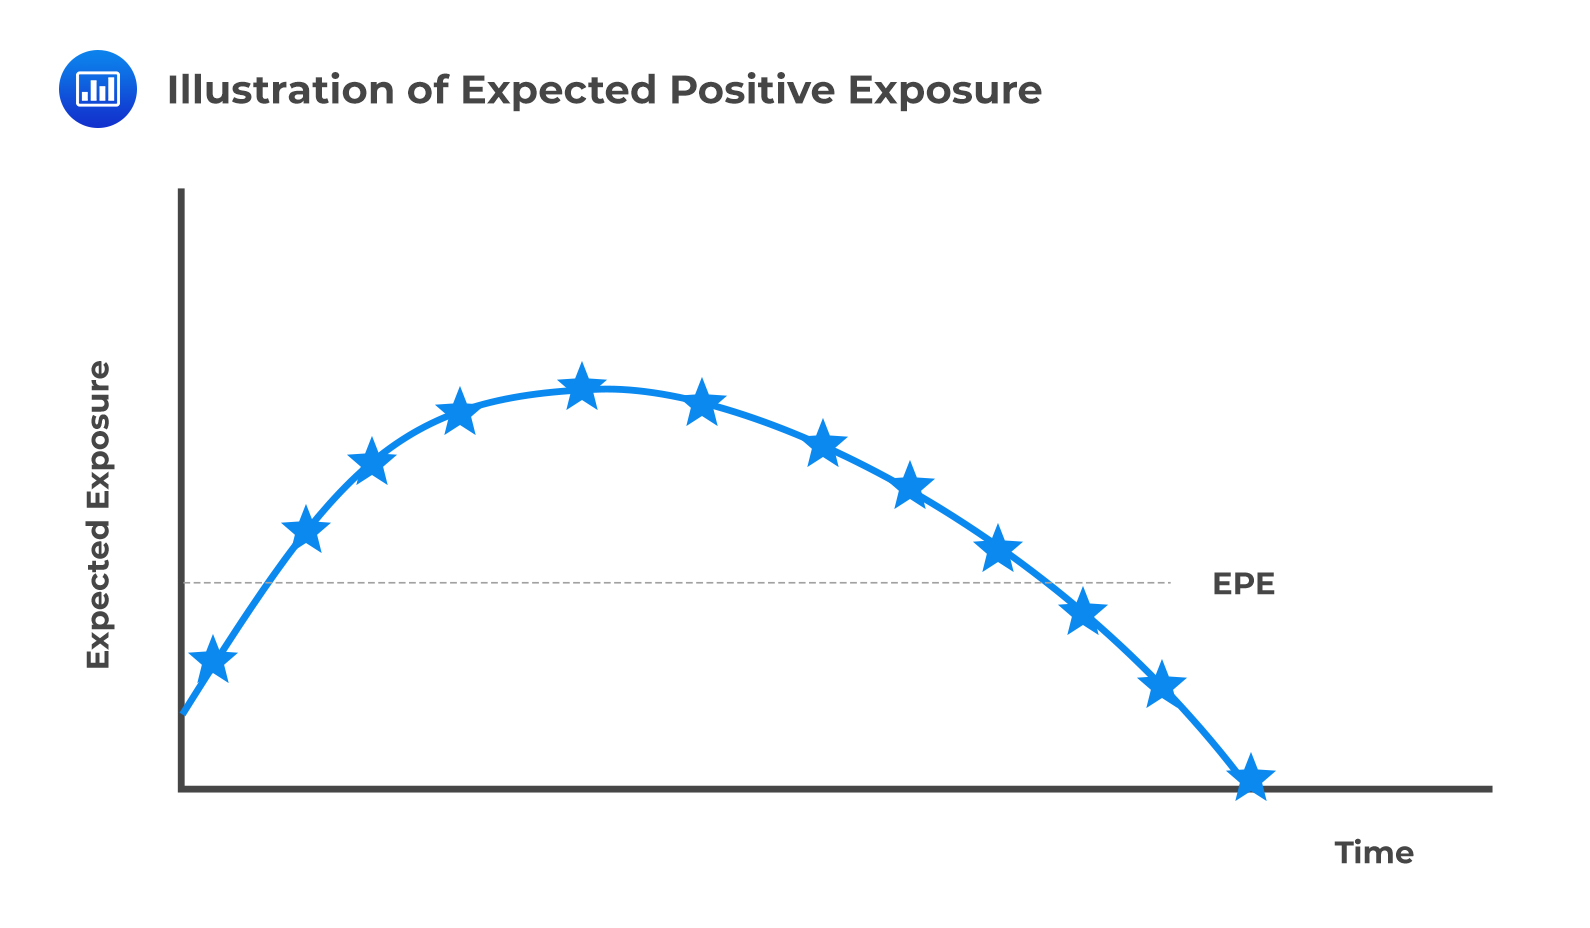 Illustration of the Expected Positive Exposure